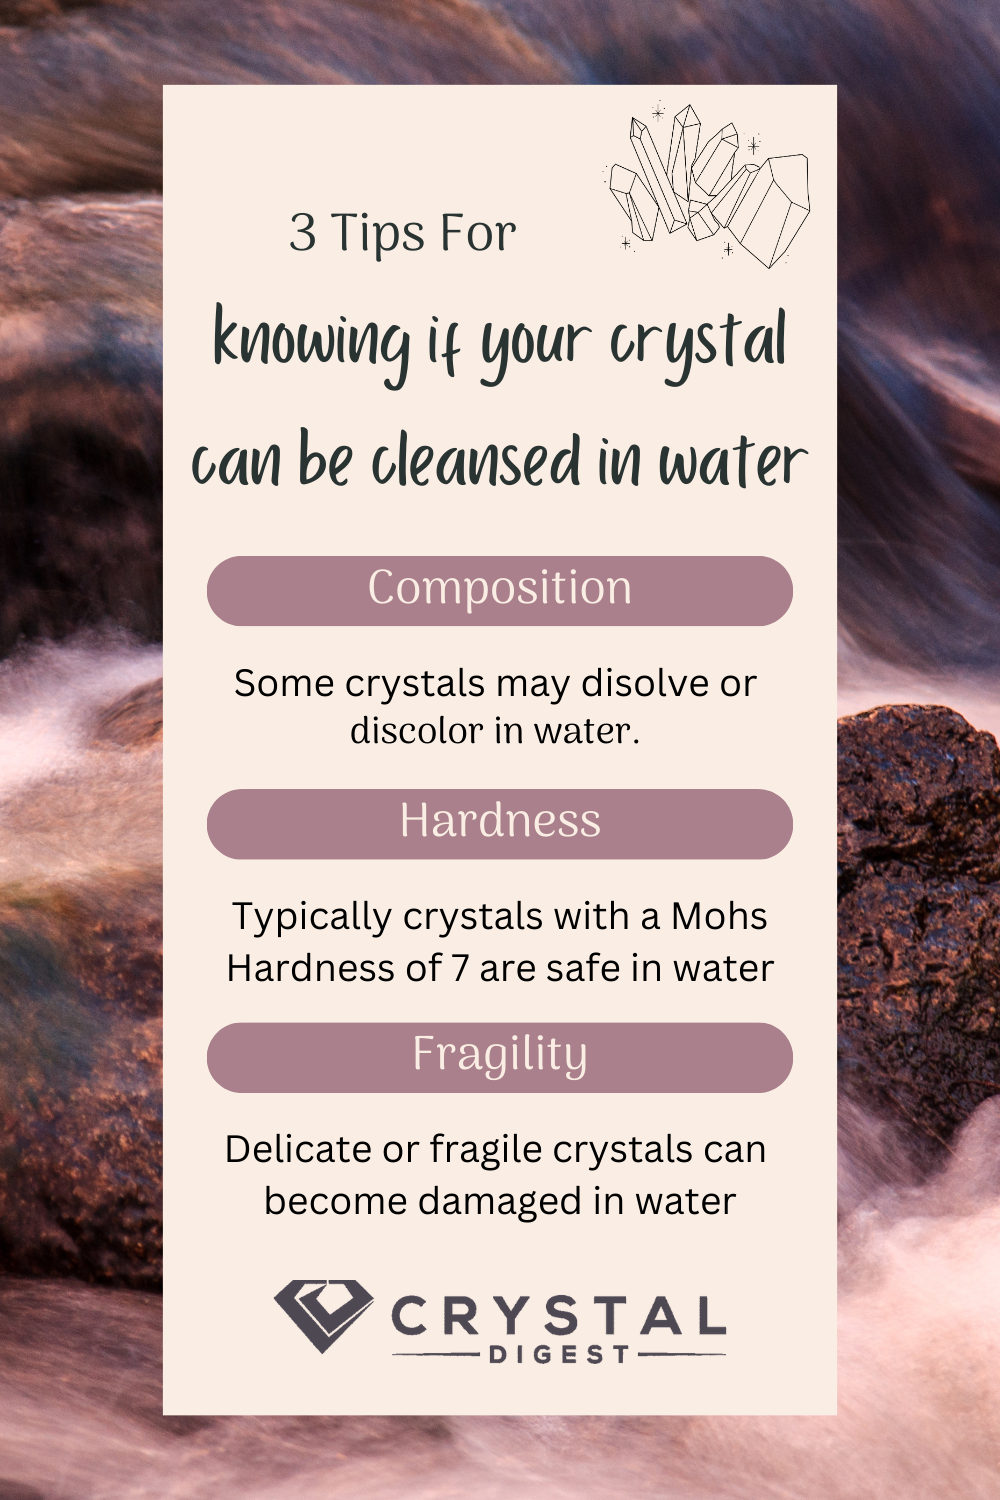 Tips for knowing which crystals to cleanse in water